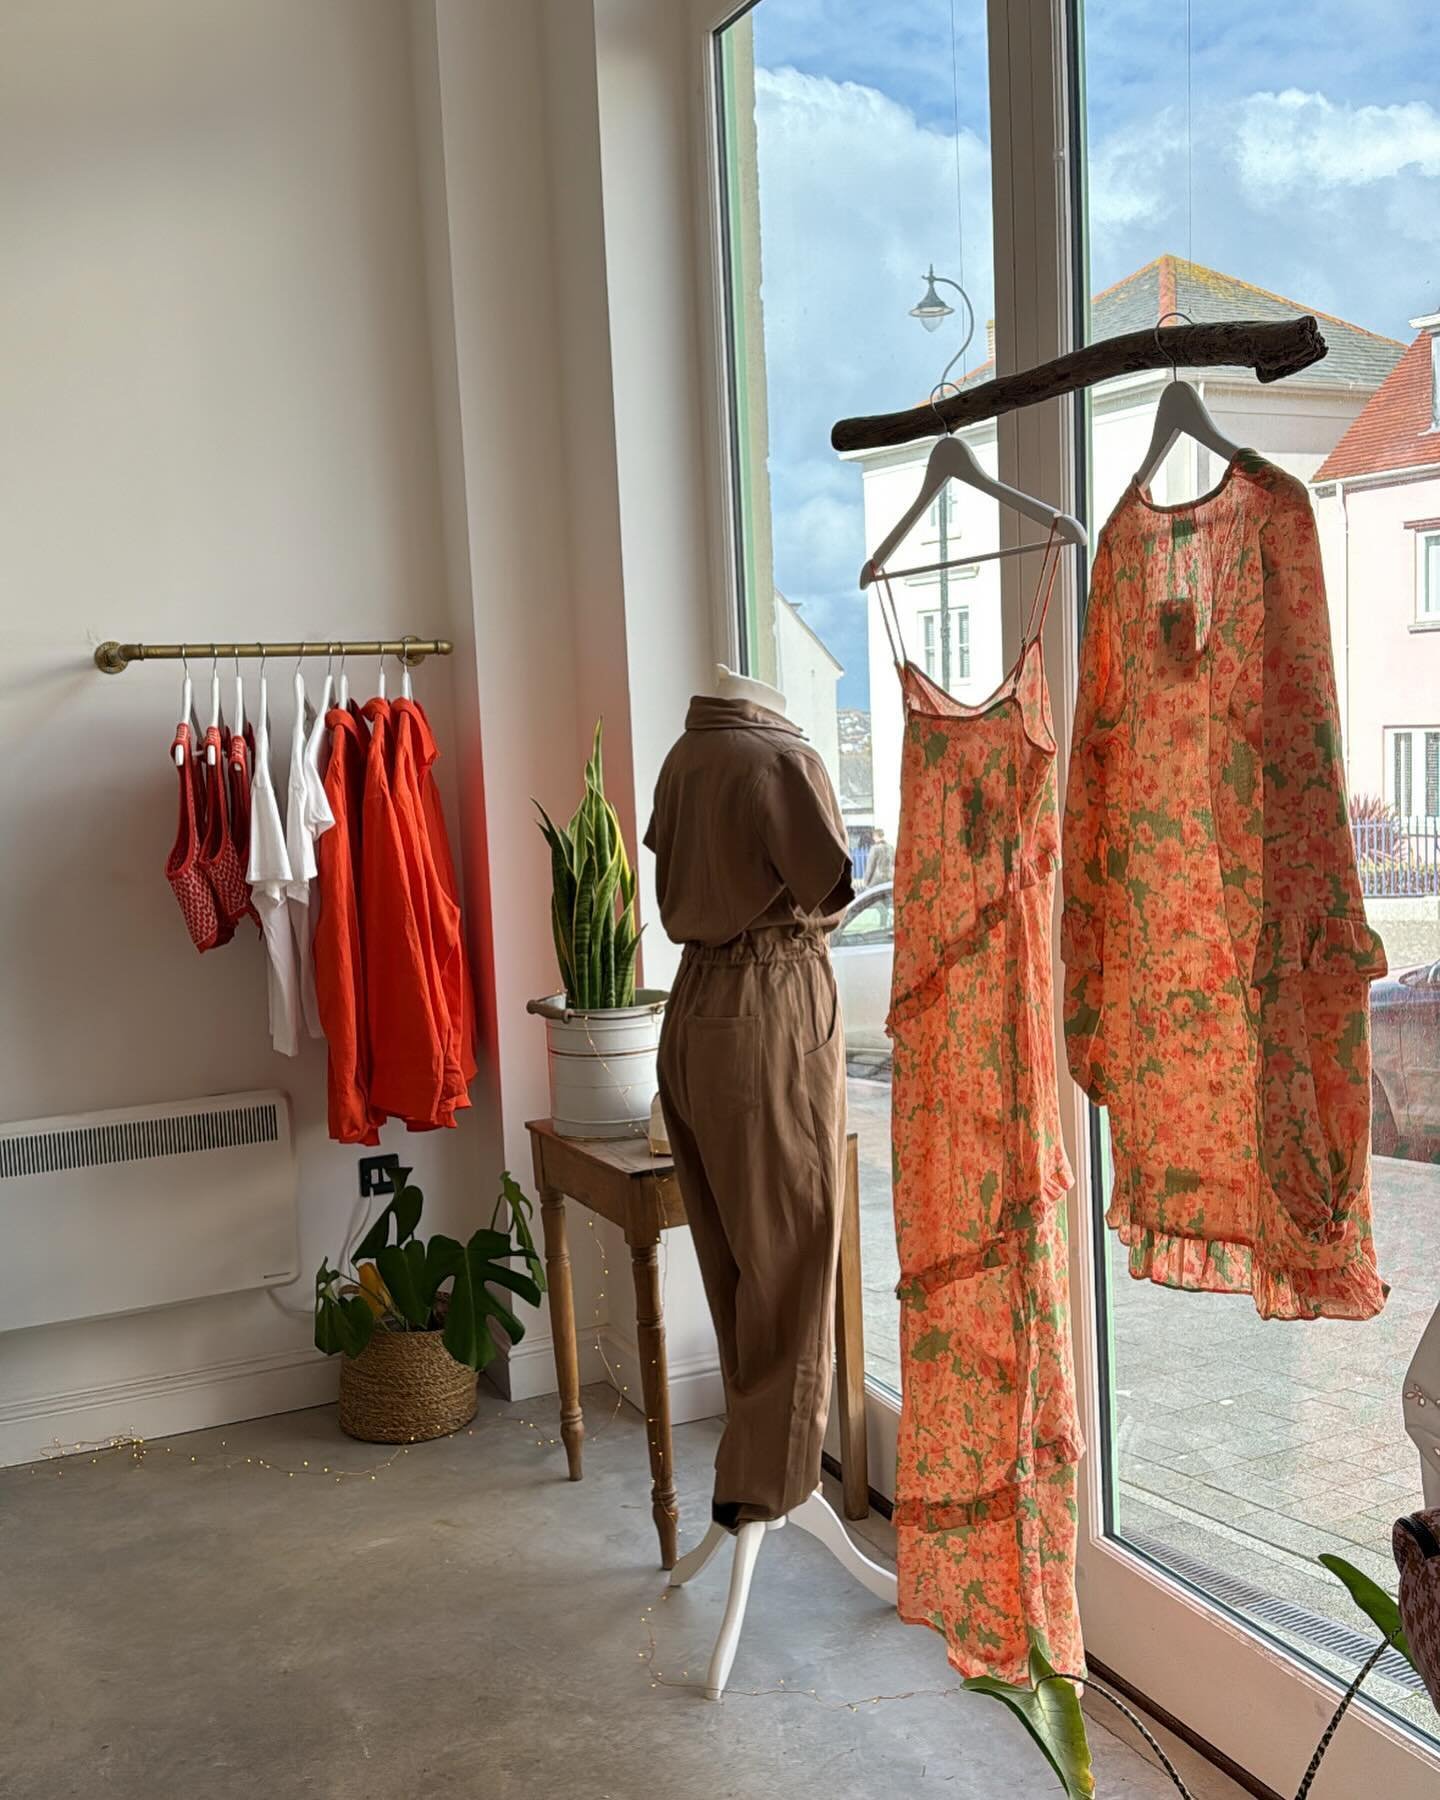 Suns shining! ✨ 

Spring dresses are go! 🙌🏼

Open from 10 🧡

#shoplocal #shopsmall #smallbusinessowner #supportsmallbusiness #womeninbusiness #cornwallcoast #cornwalllife #cornwallholiday #boutiqueshopping #cornwallliving